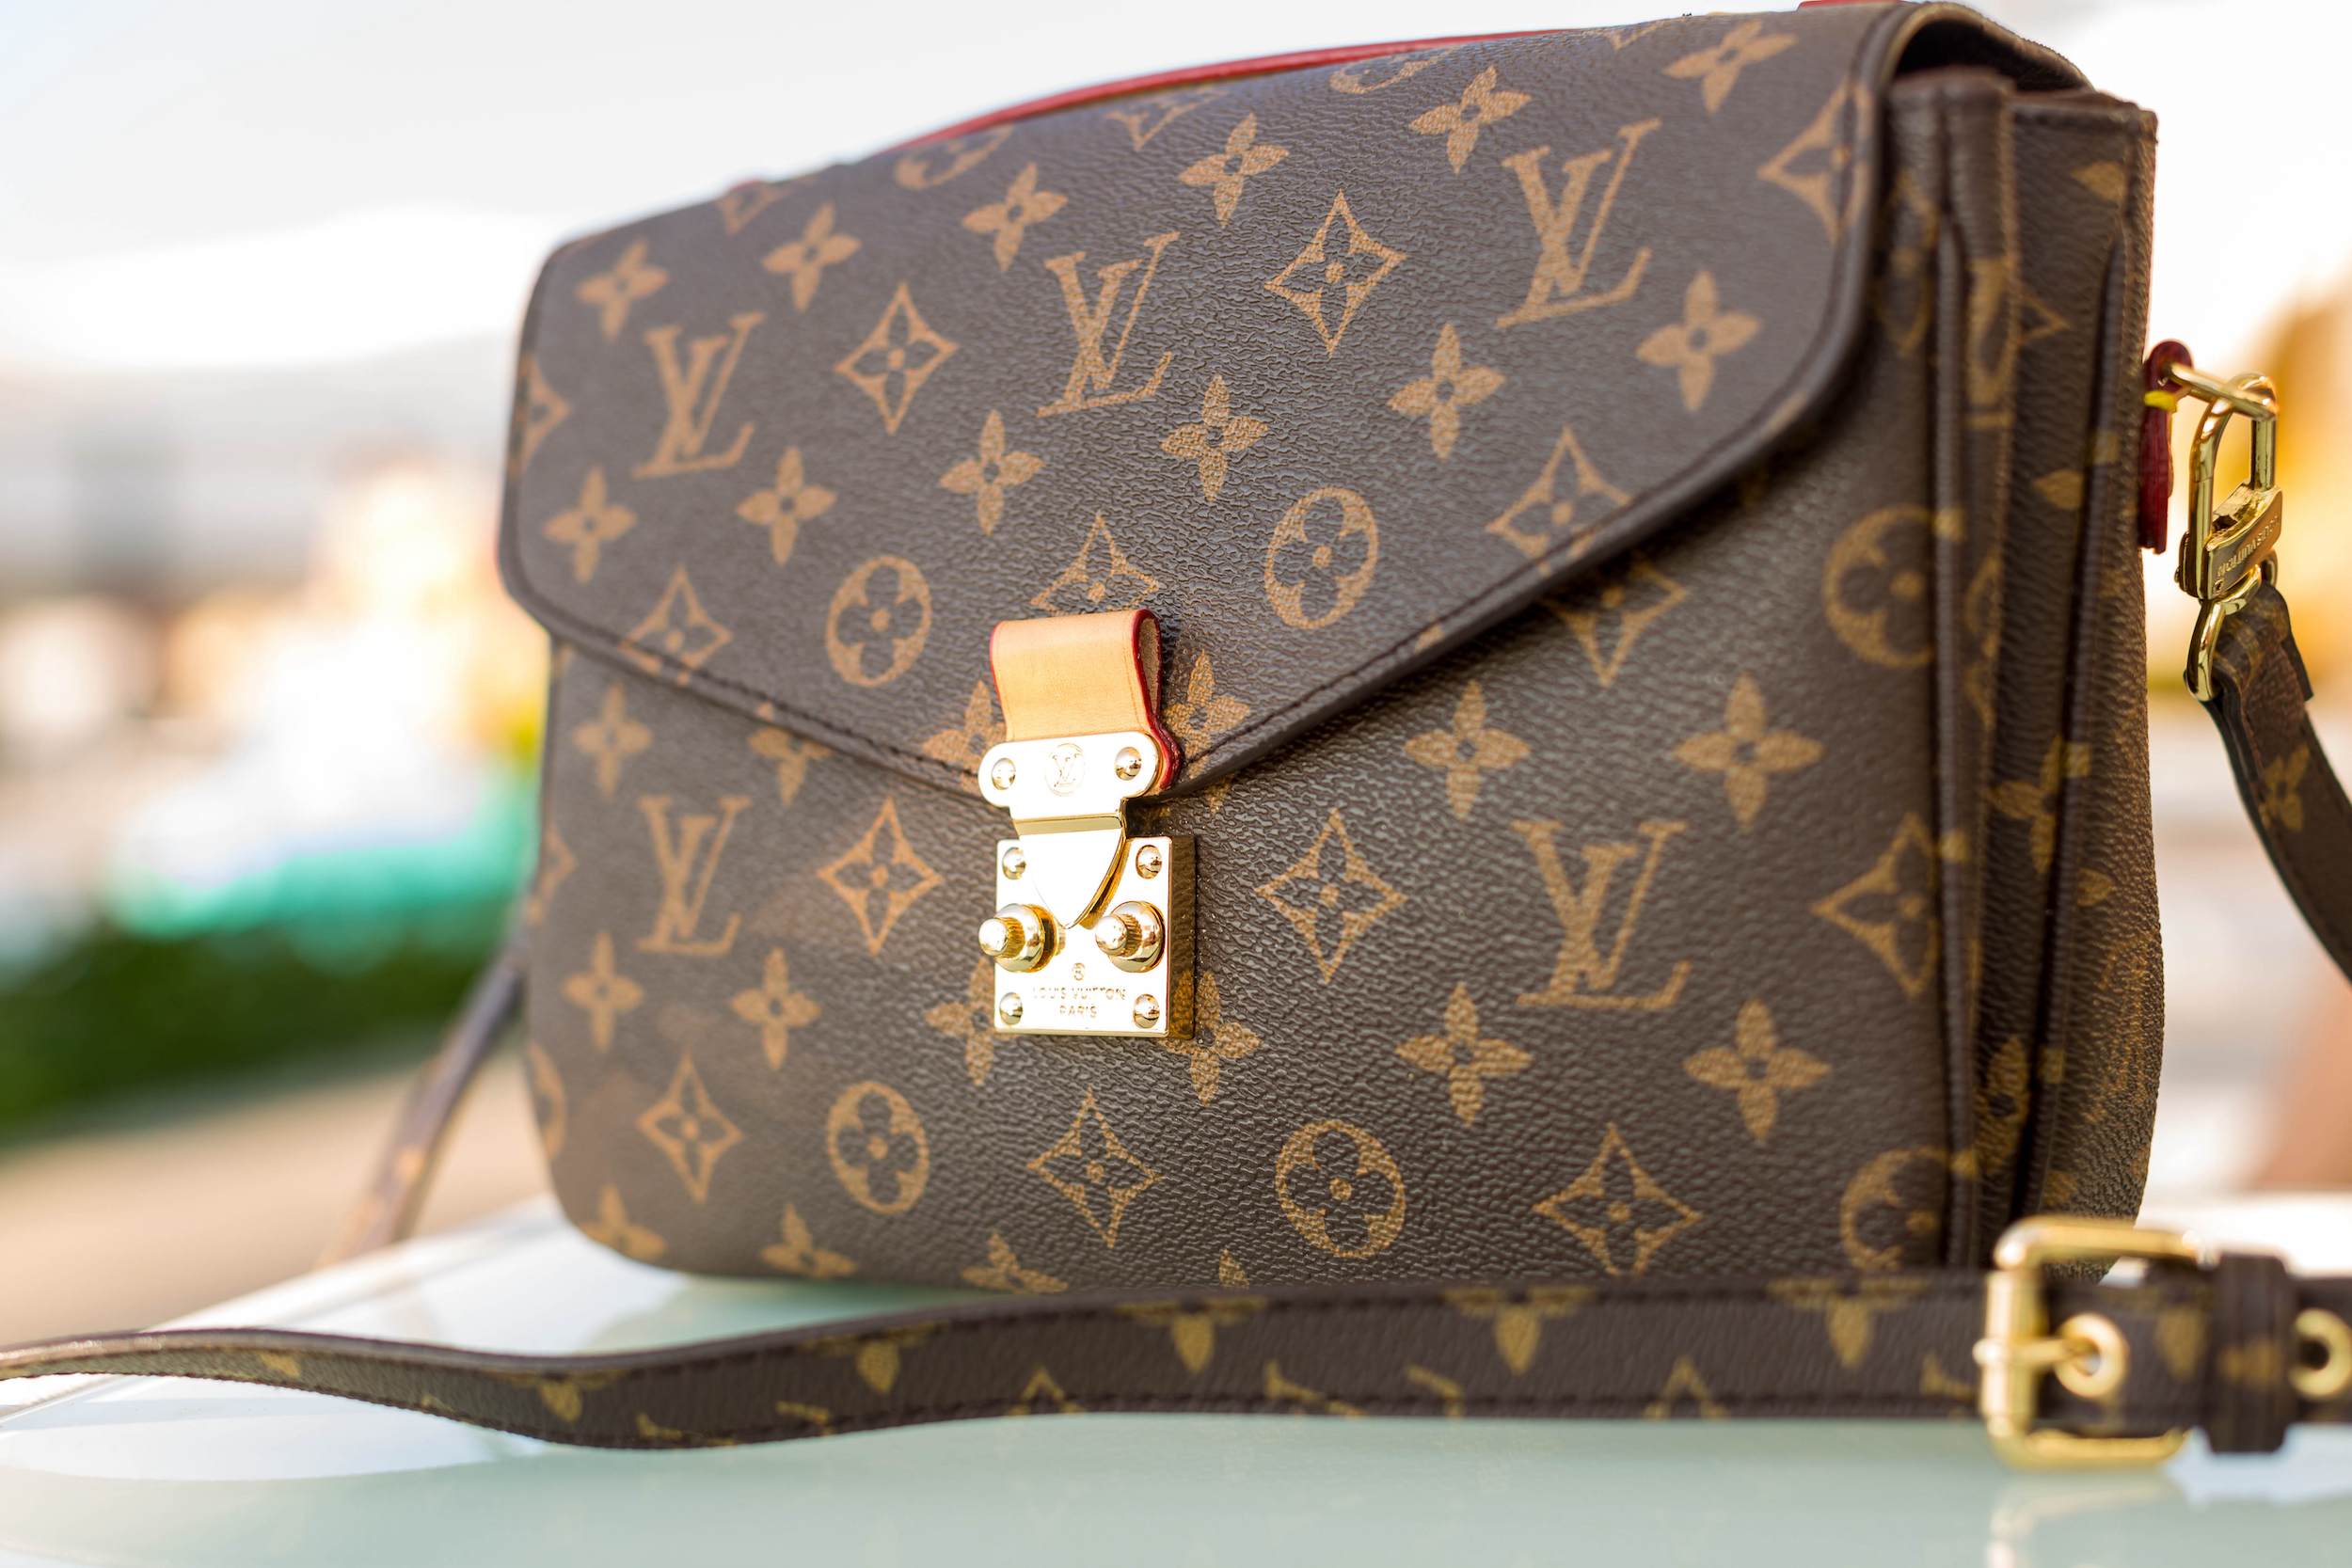 Iconic  Timeless Louis Vuitton Bags  Purses To Invest In  Trade Gold And  Get The Latest Gold Price Today In Singapore  MaxiCash